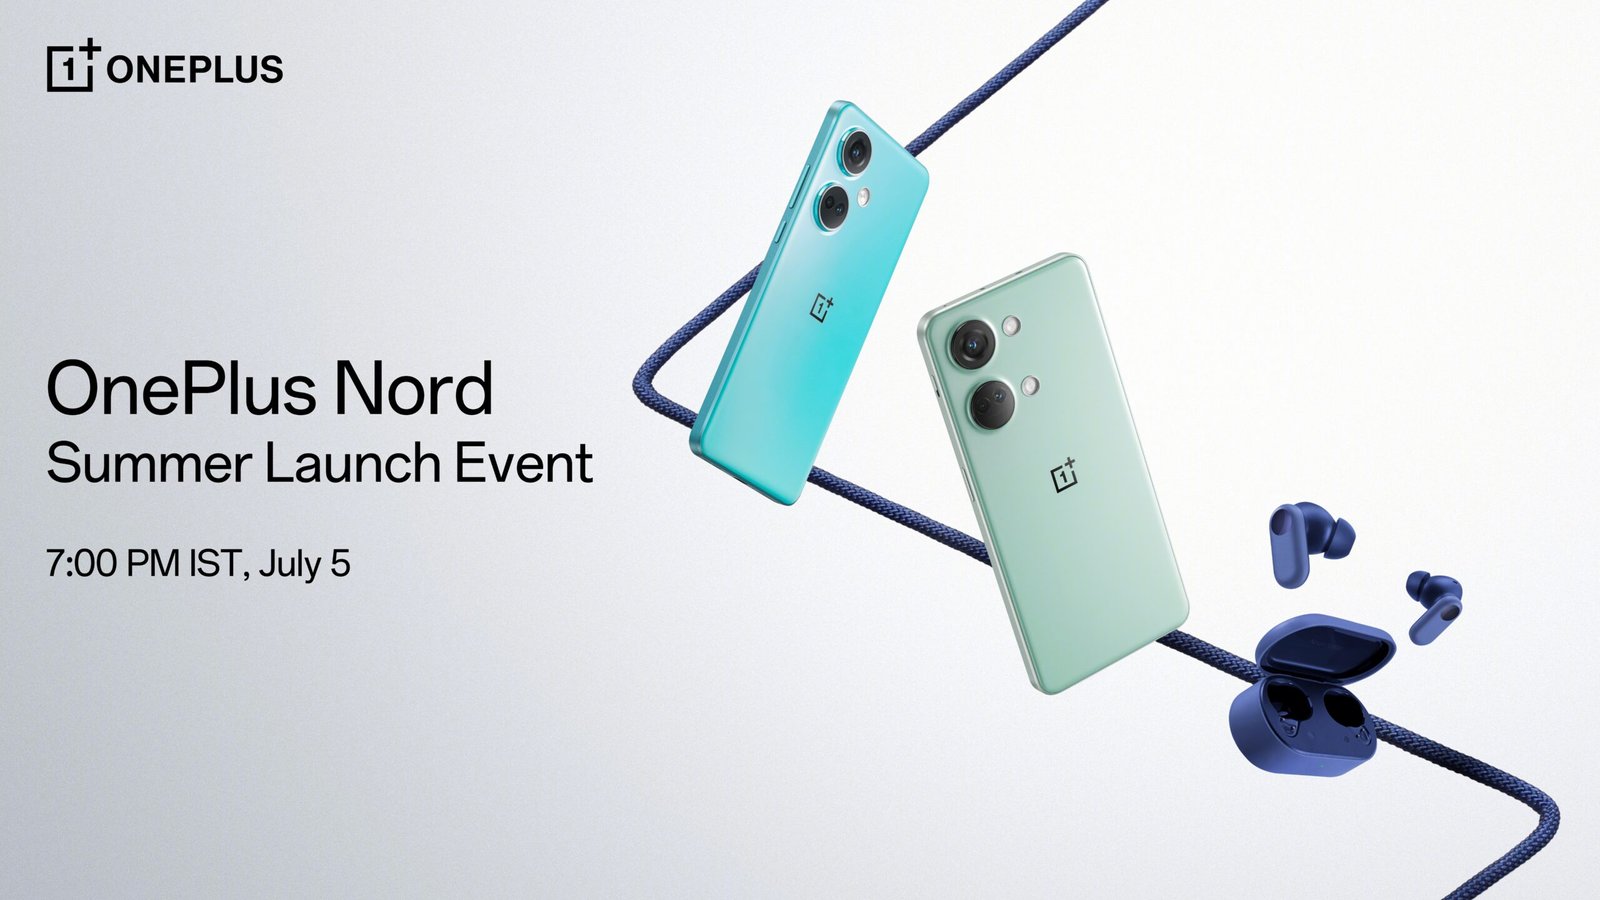 OnePlus launches new OnePlus Nord phones and OnePlus Nord Buds at Summer Launch Event 